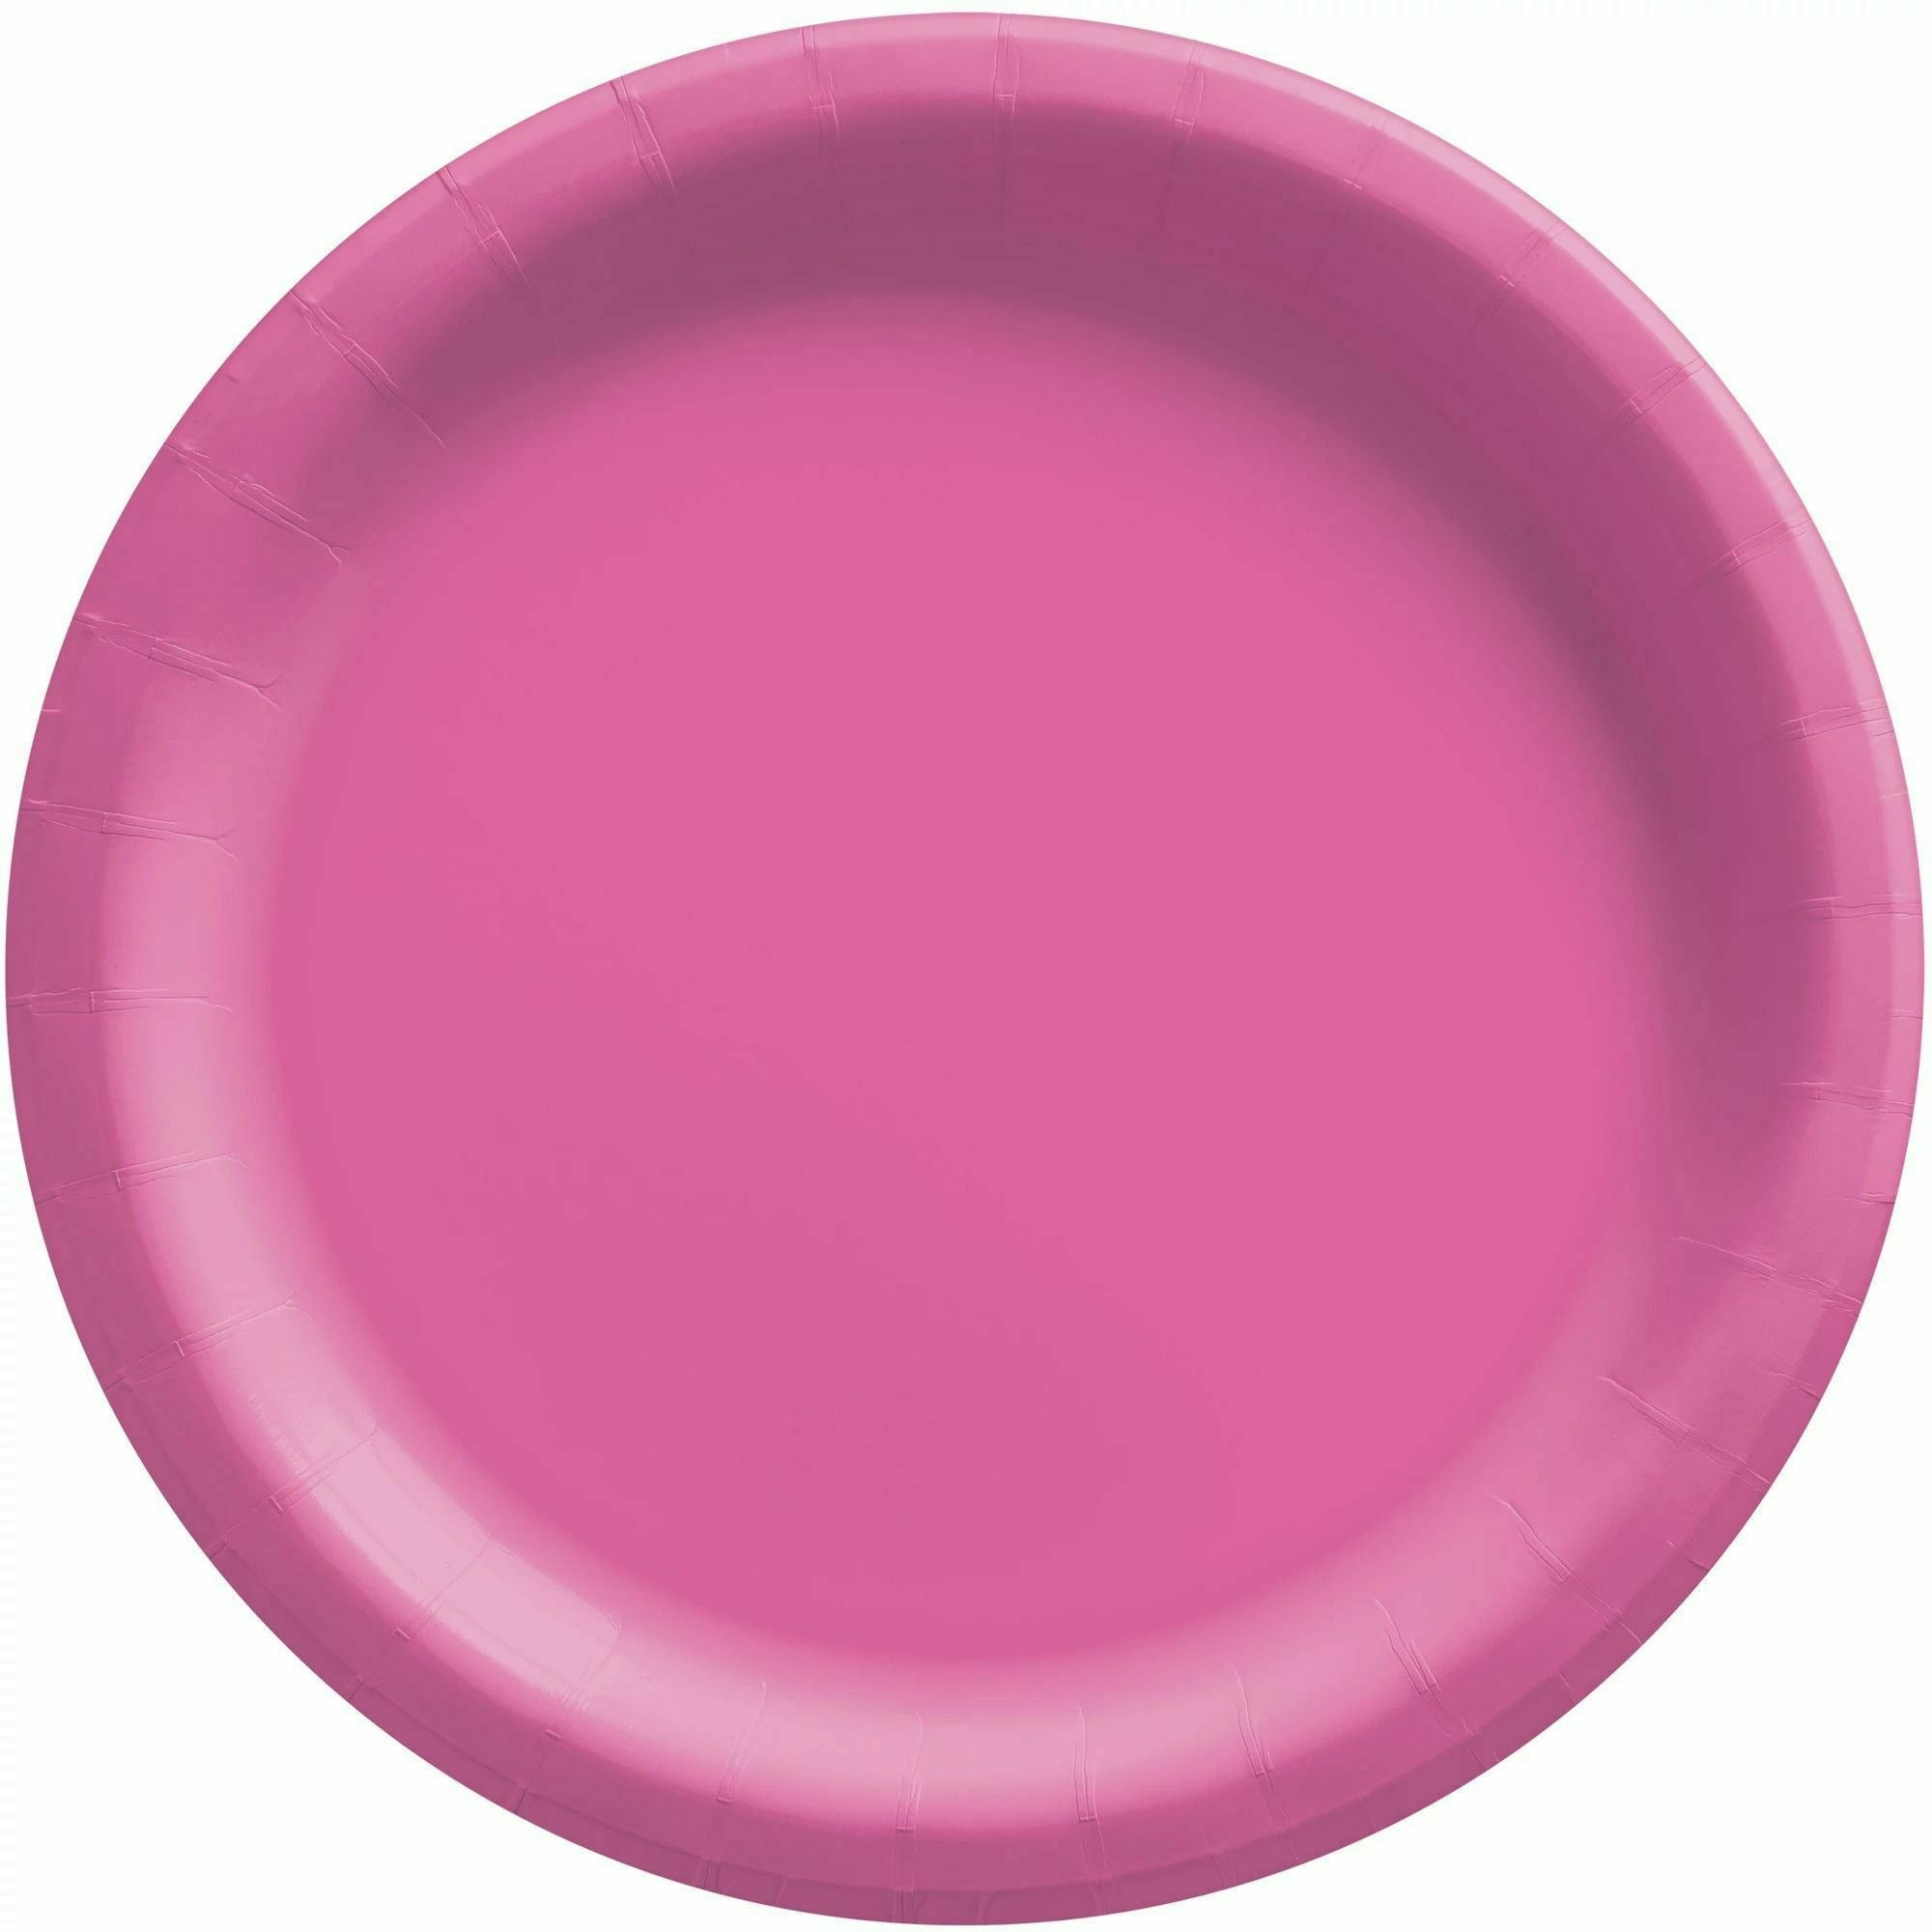 Amscan BASIC Bright Pink - 8 1/2" Round Paper Plates, 20 Ct.